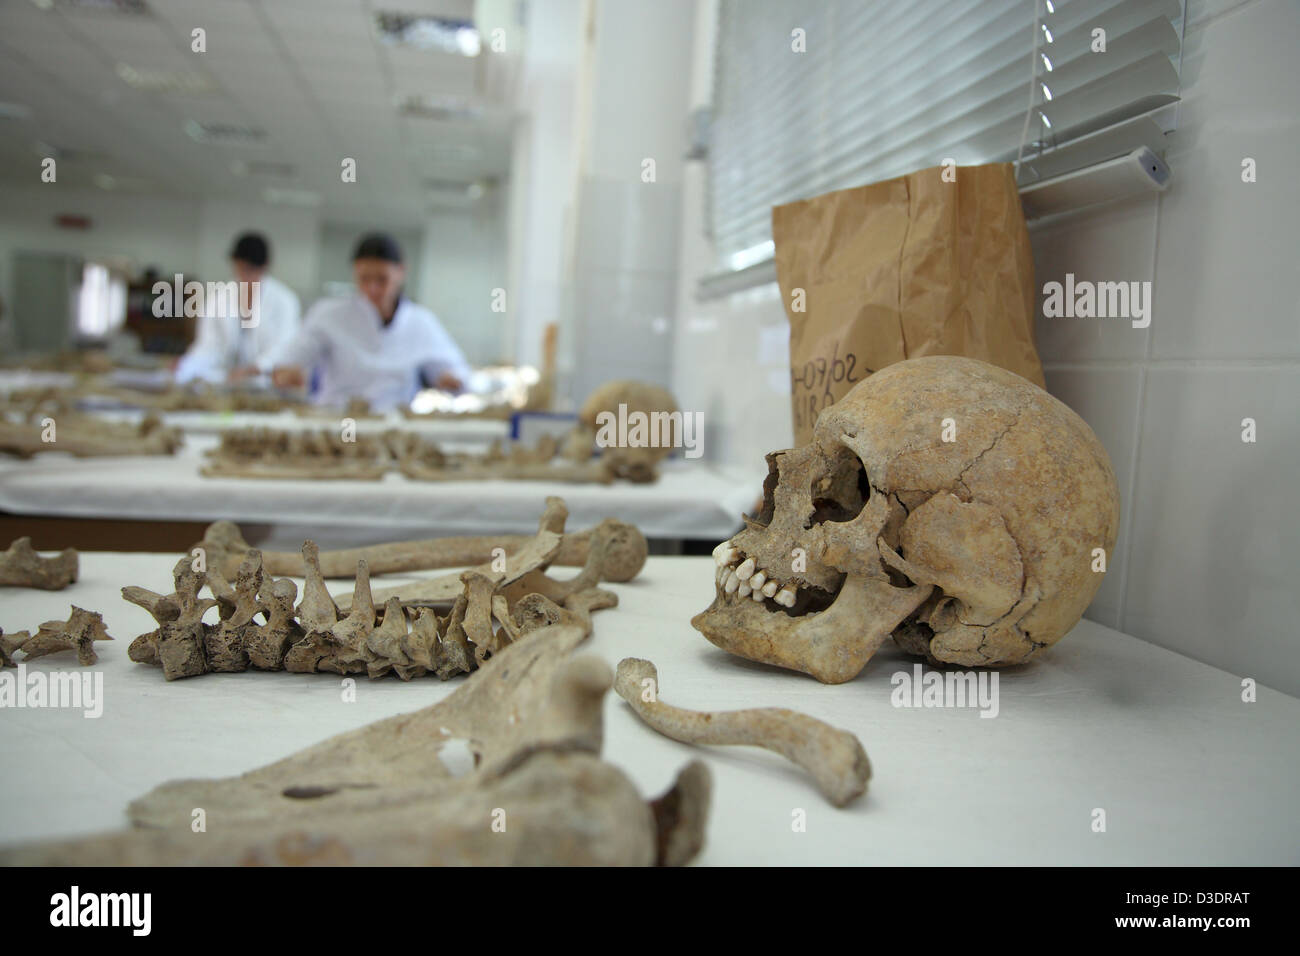 Anthropology lab of the Committee on Missing Persons in Cyprus Stock Photo